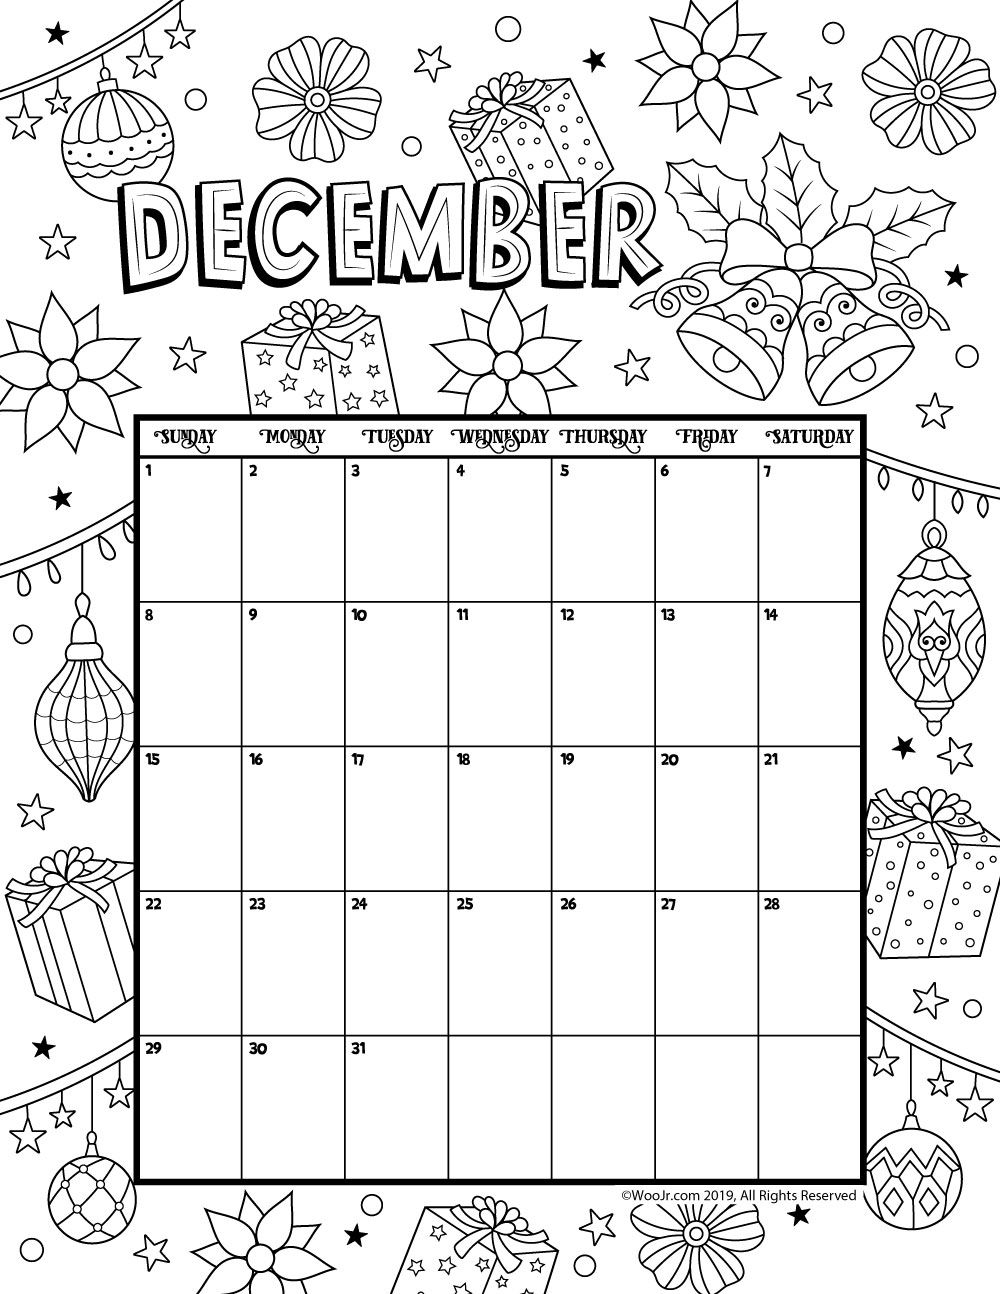 December Calendar 2021 Coloring Pages